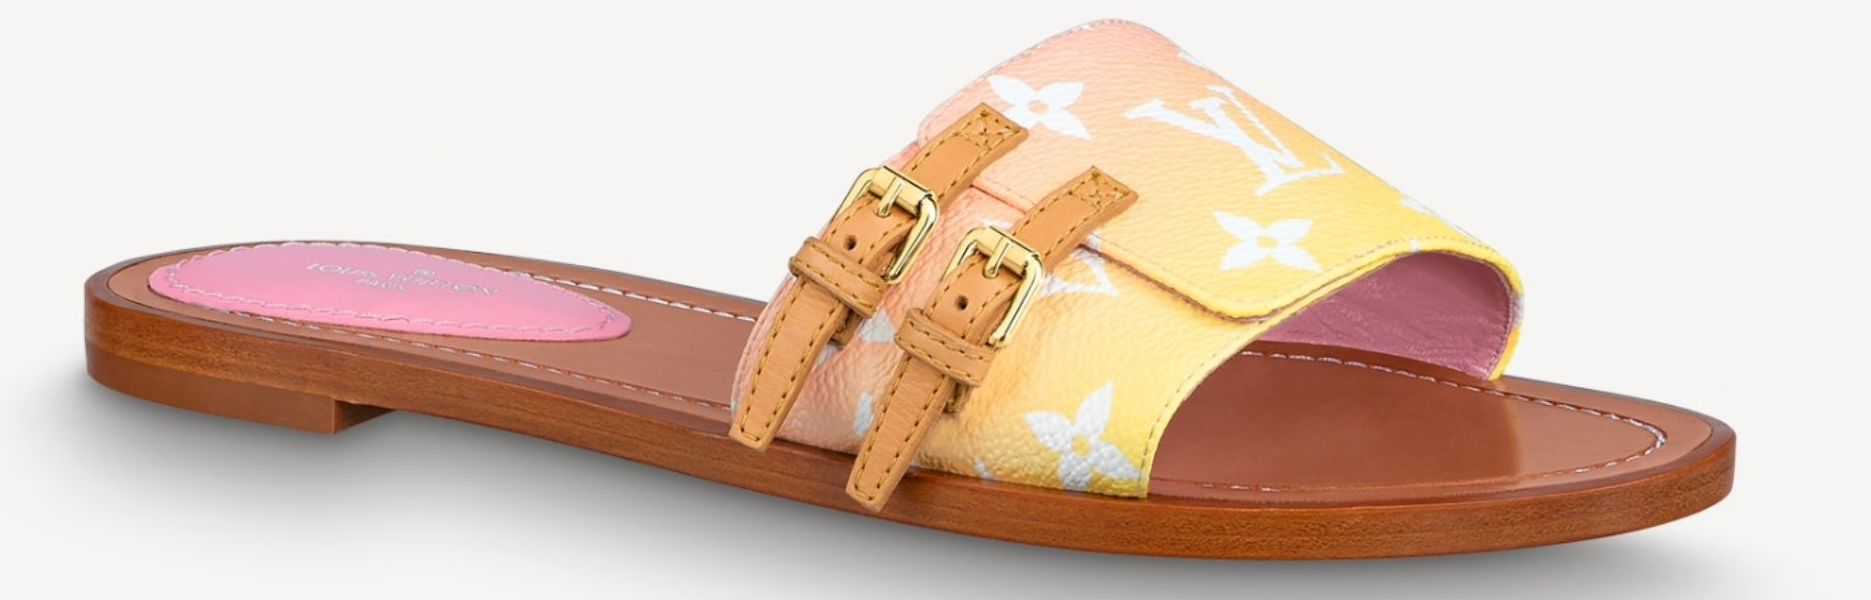 Louis Vuitton LV by The Pool Revival Flat Mule, Pink, 39